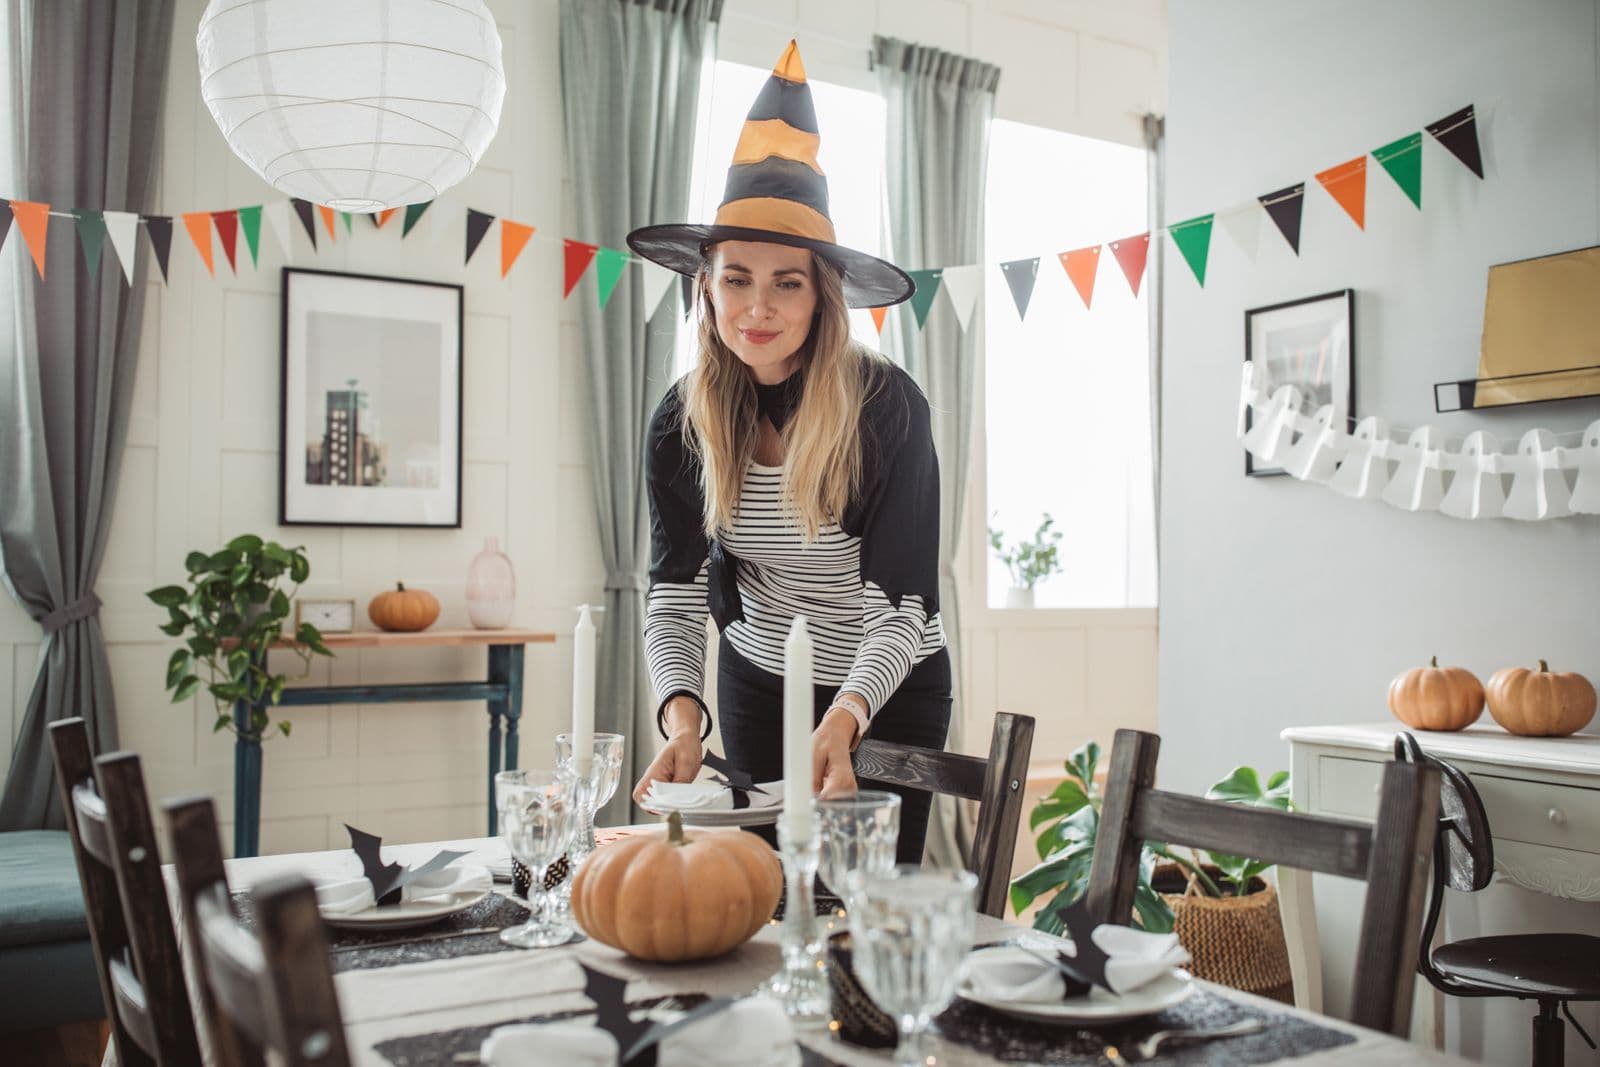 5 Clever Ways to Add Spooktacular Halloween Decorations at Home ...